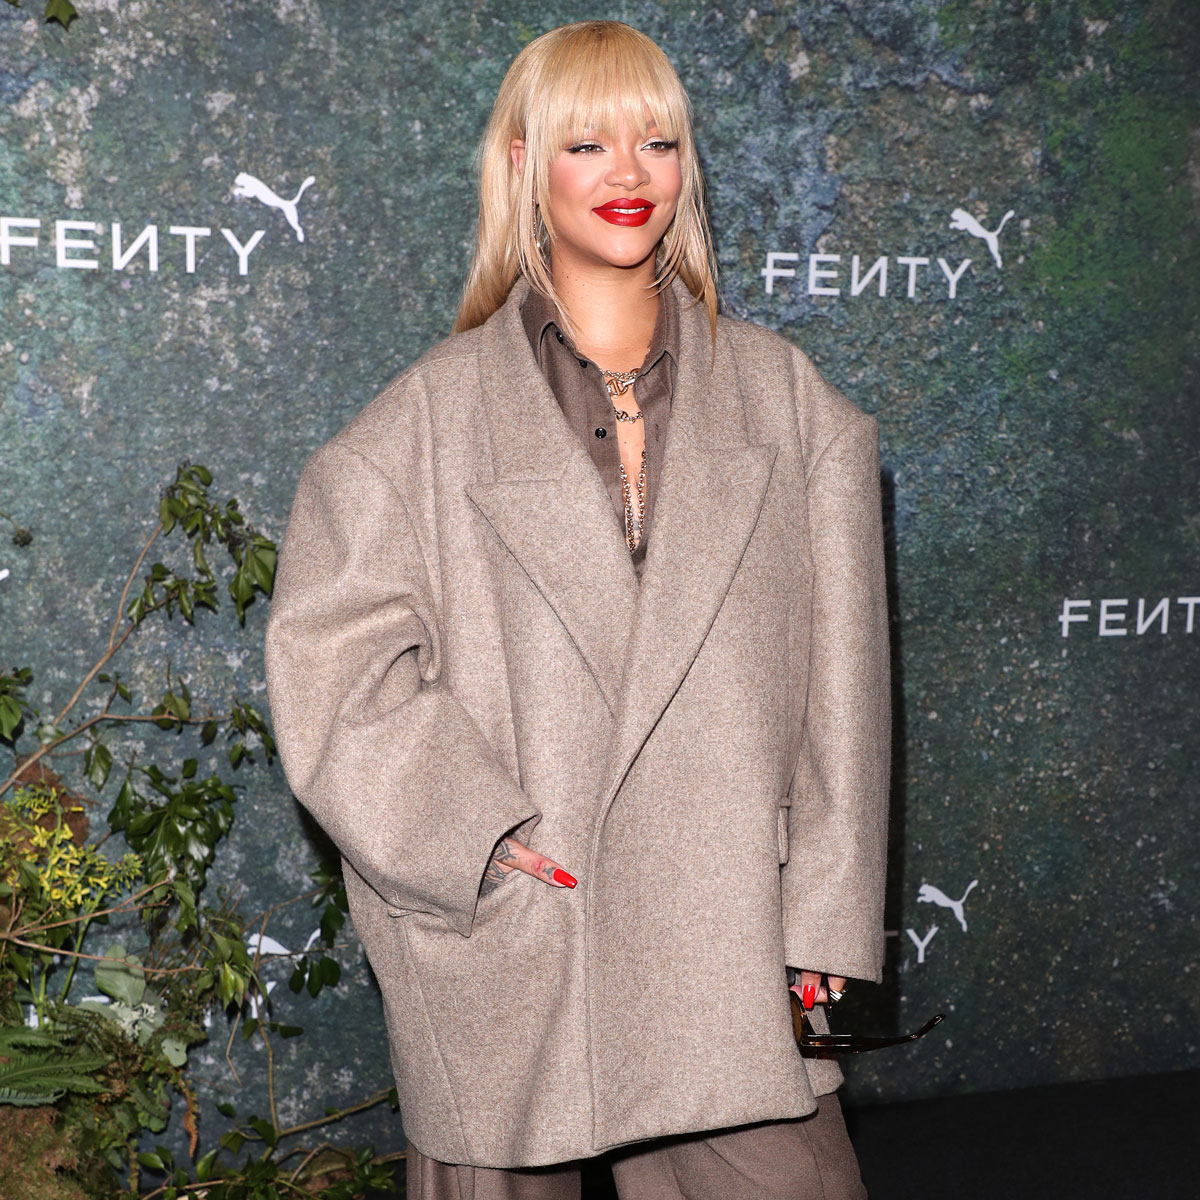 Rihanna Reveals Her Ultimate Obsession—And It’s Exactly What You Came For